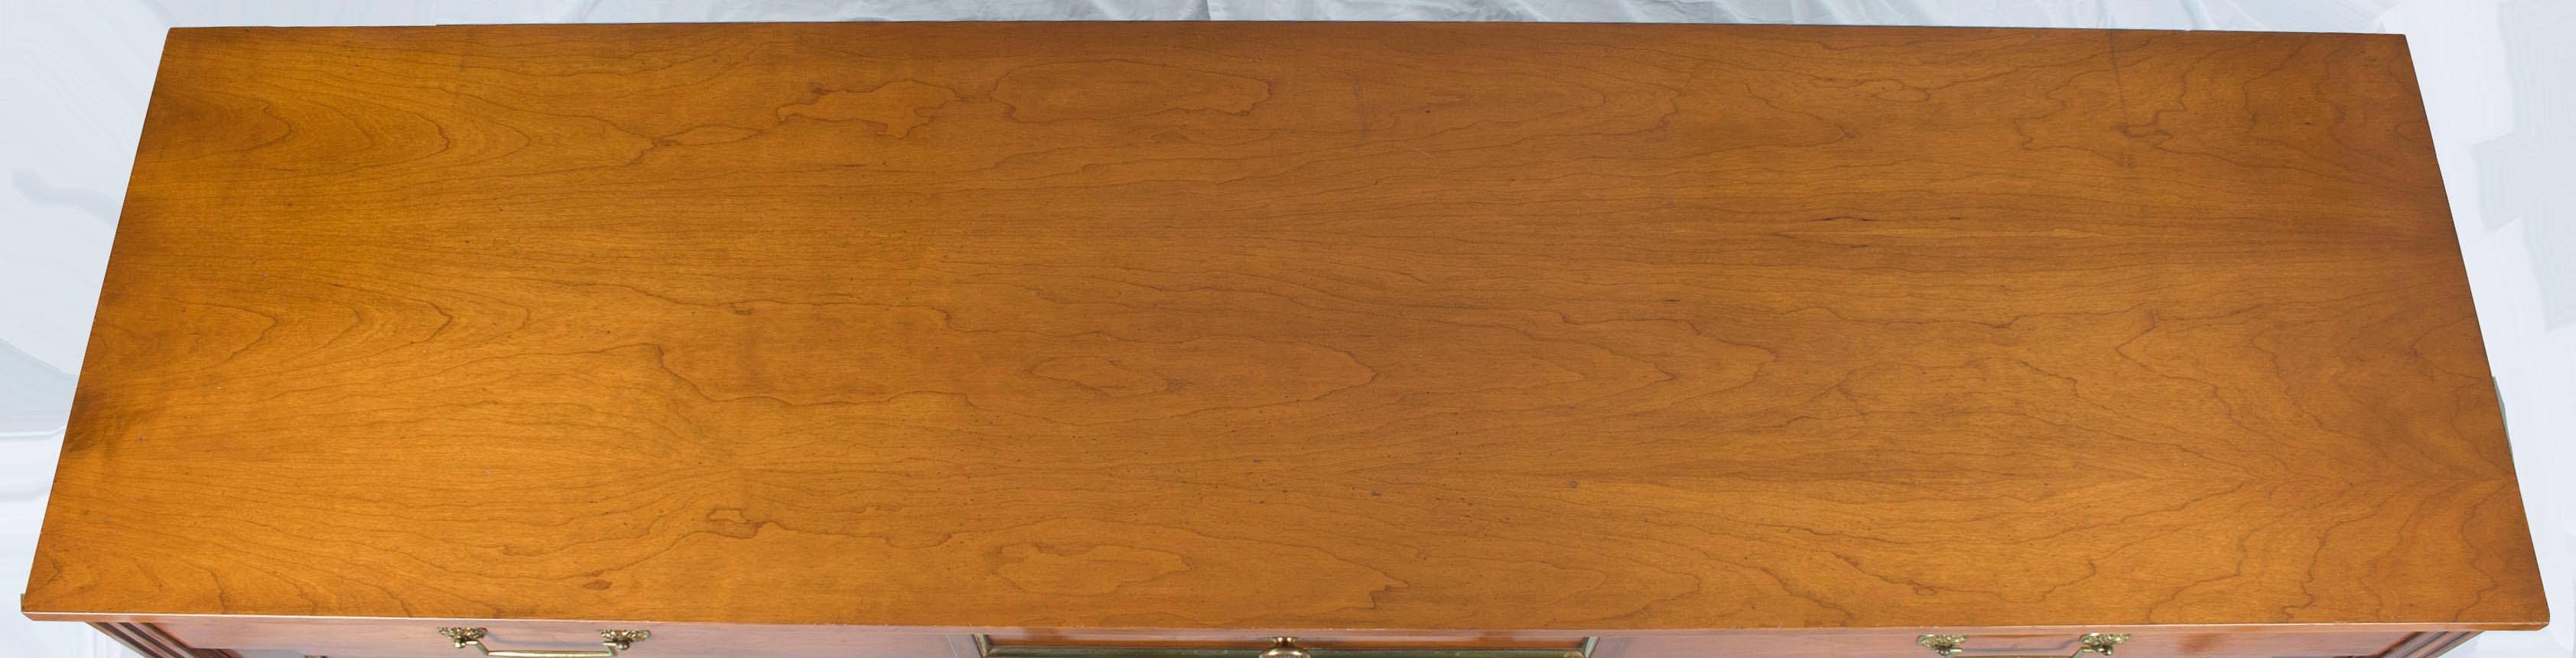 Directoire Style Mid-Century Modern Credenza Buffet Sideboard For Sale 1